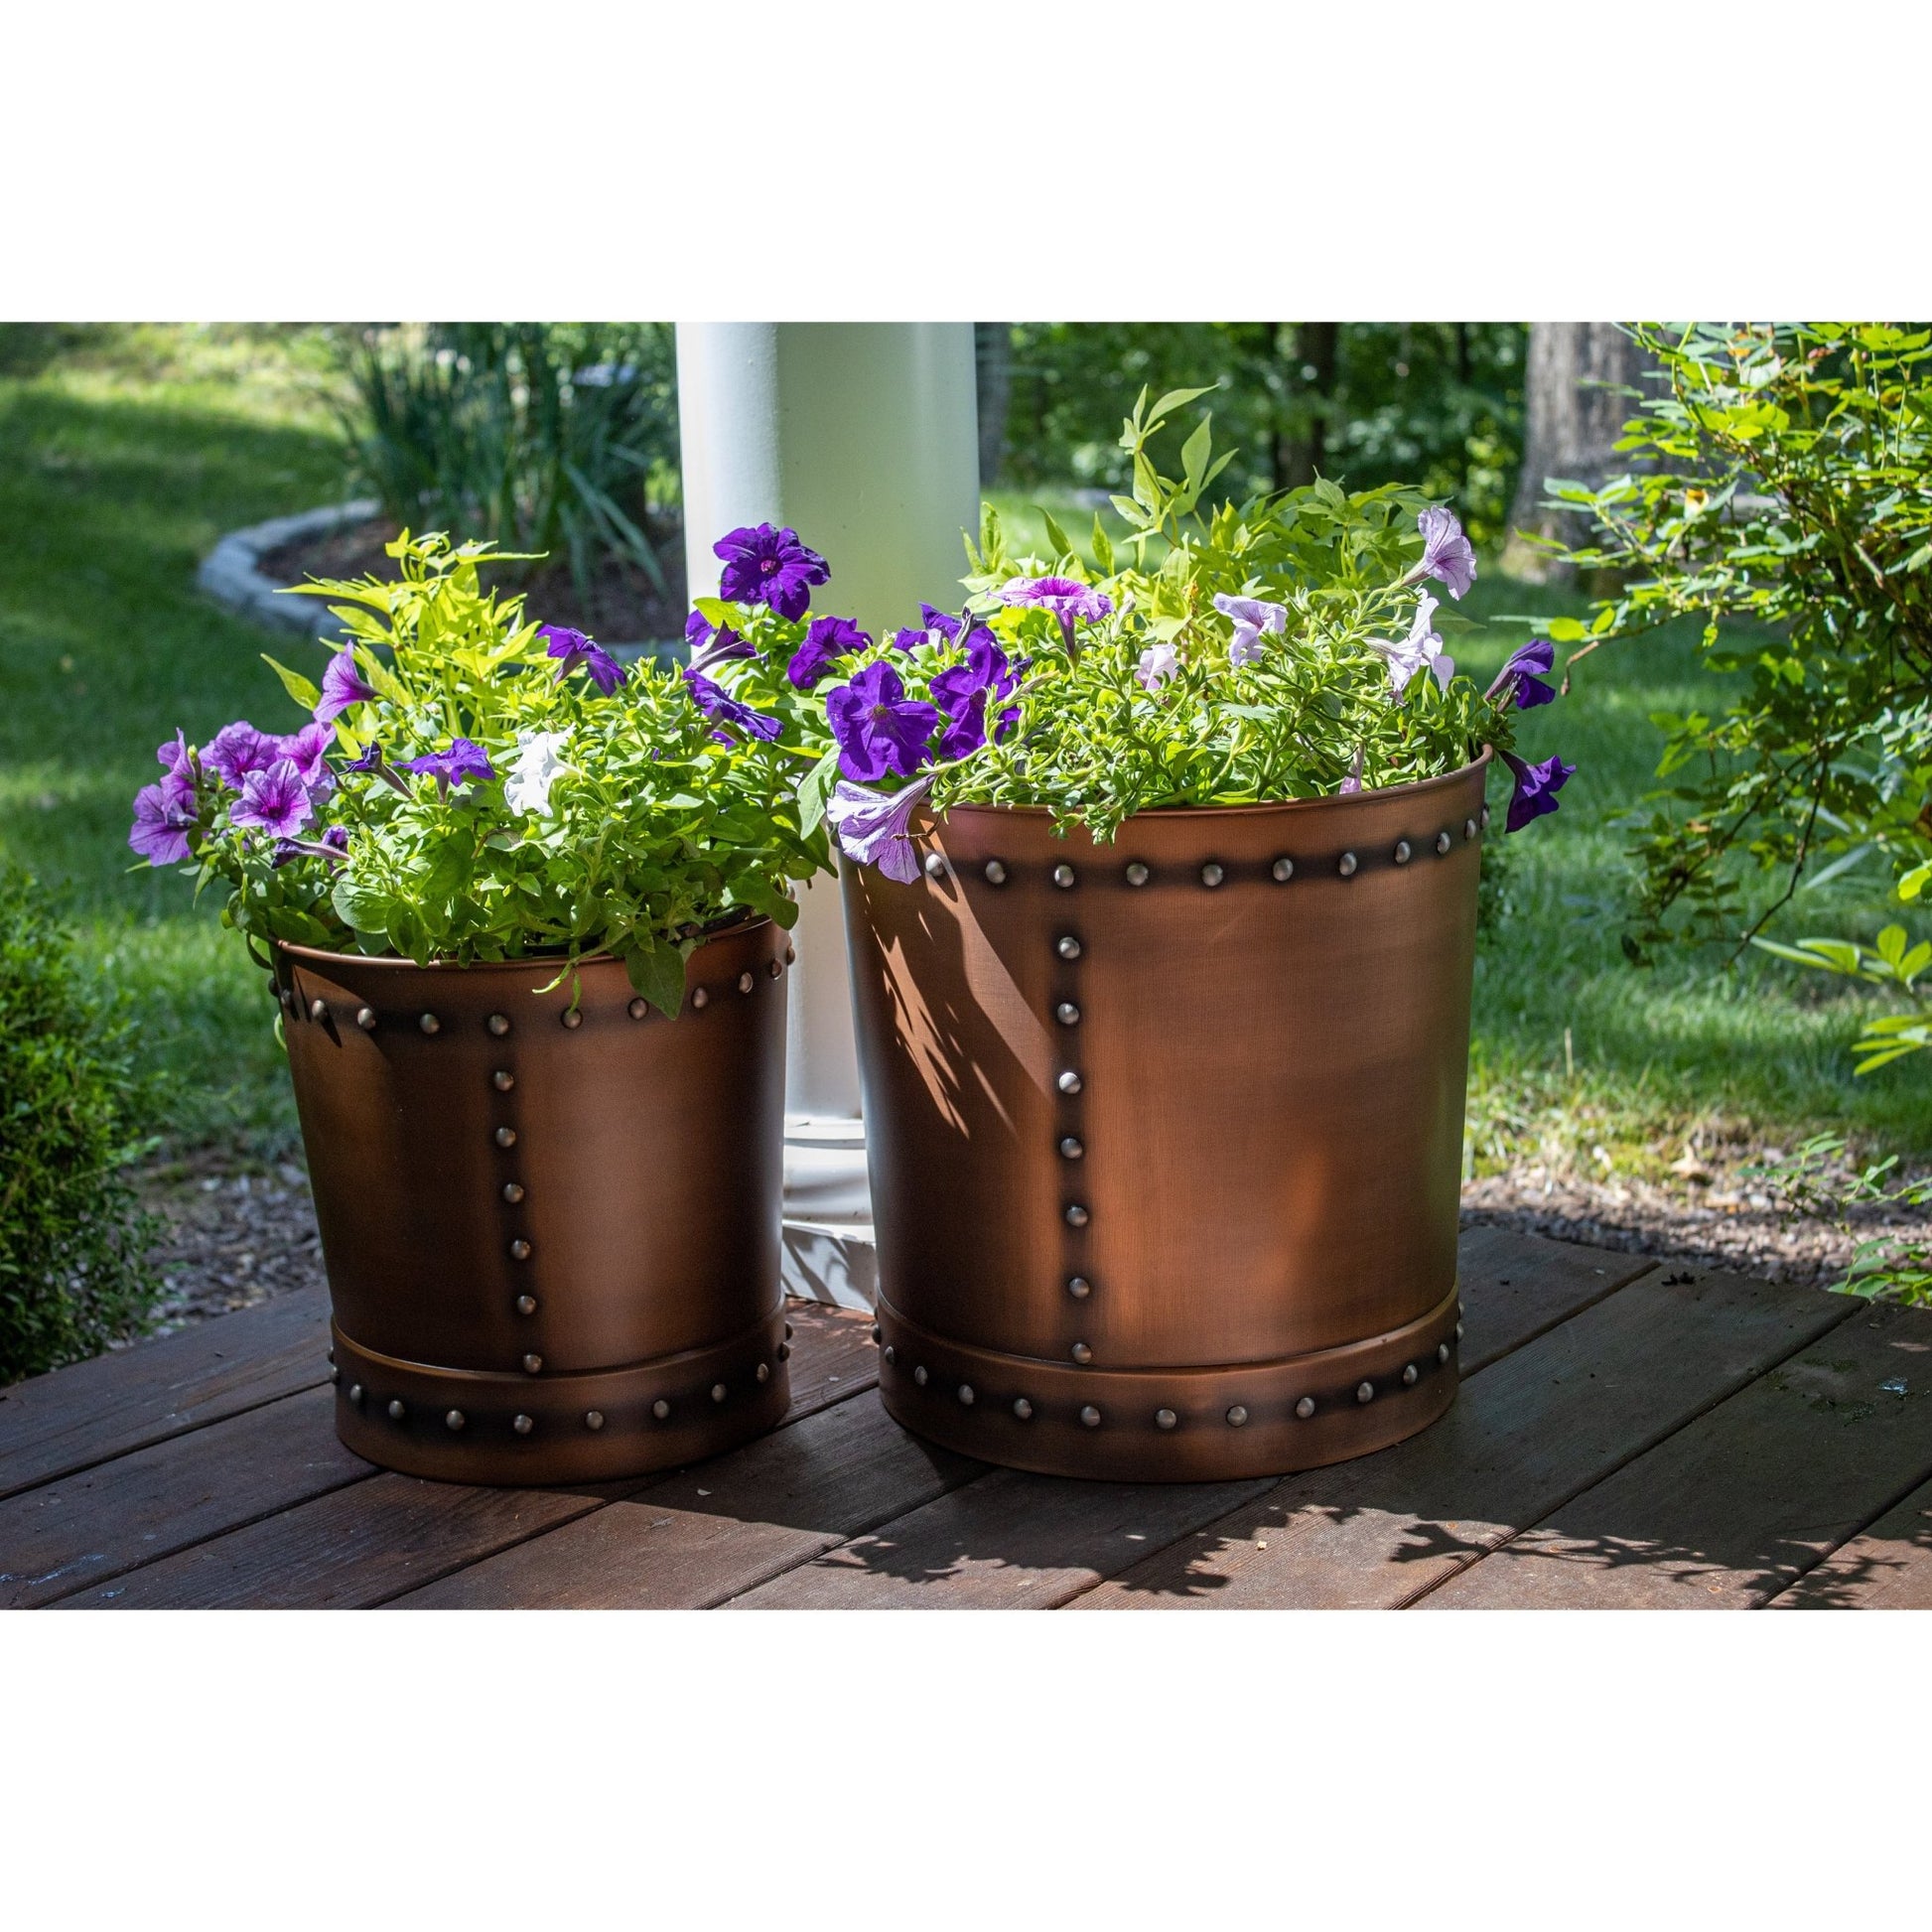 Large Riveted Copper Planter Set of 2 - Good Directions